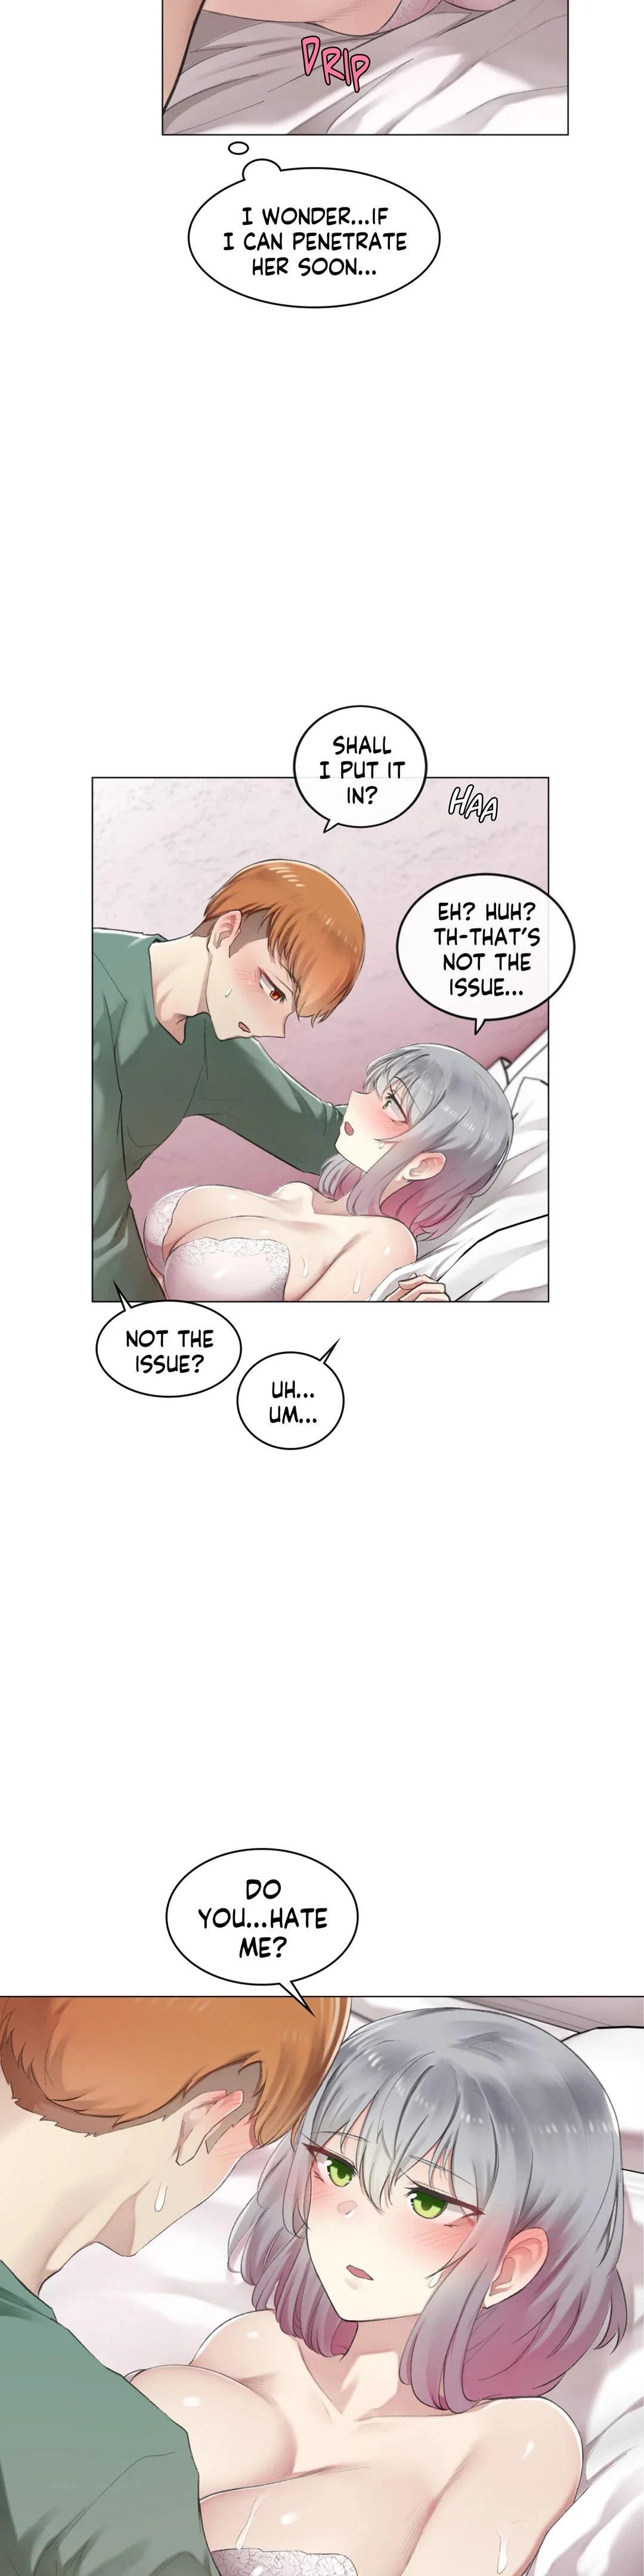 [Dumangoon, KONG_] Sexcape Room: Snap Off Ch.7/7 [English] [Manhwa PDF] Completed 99